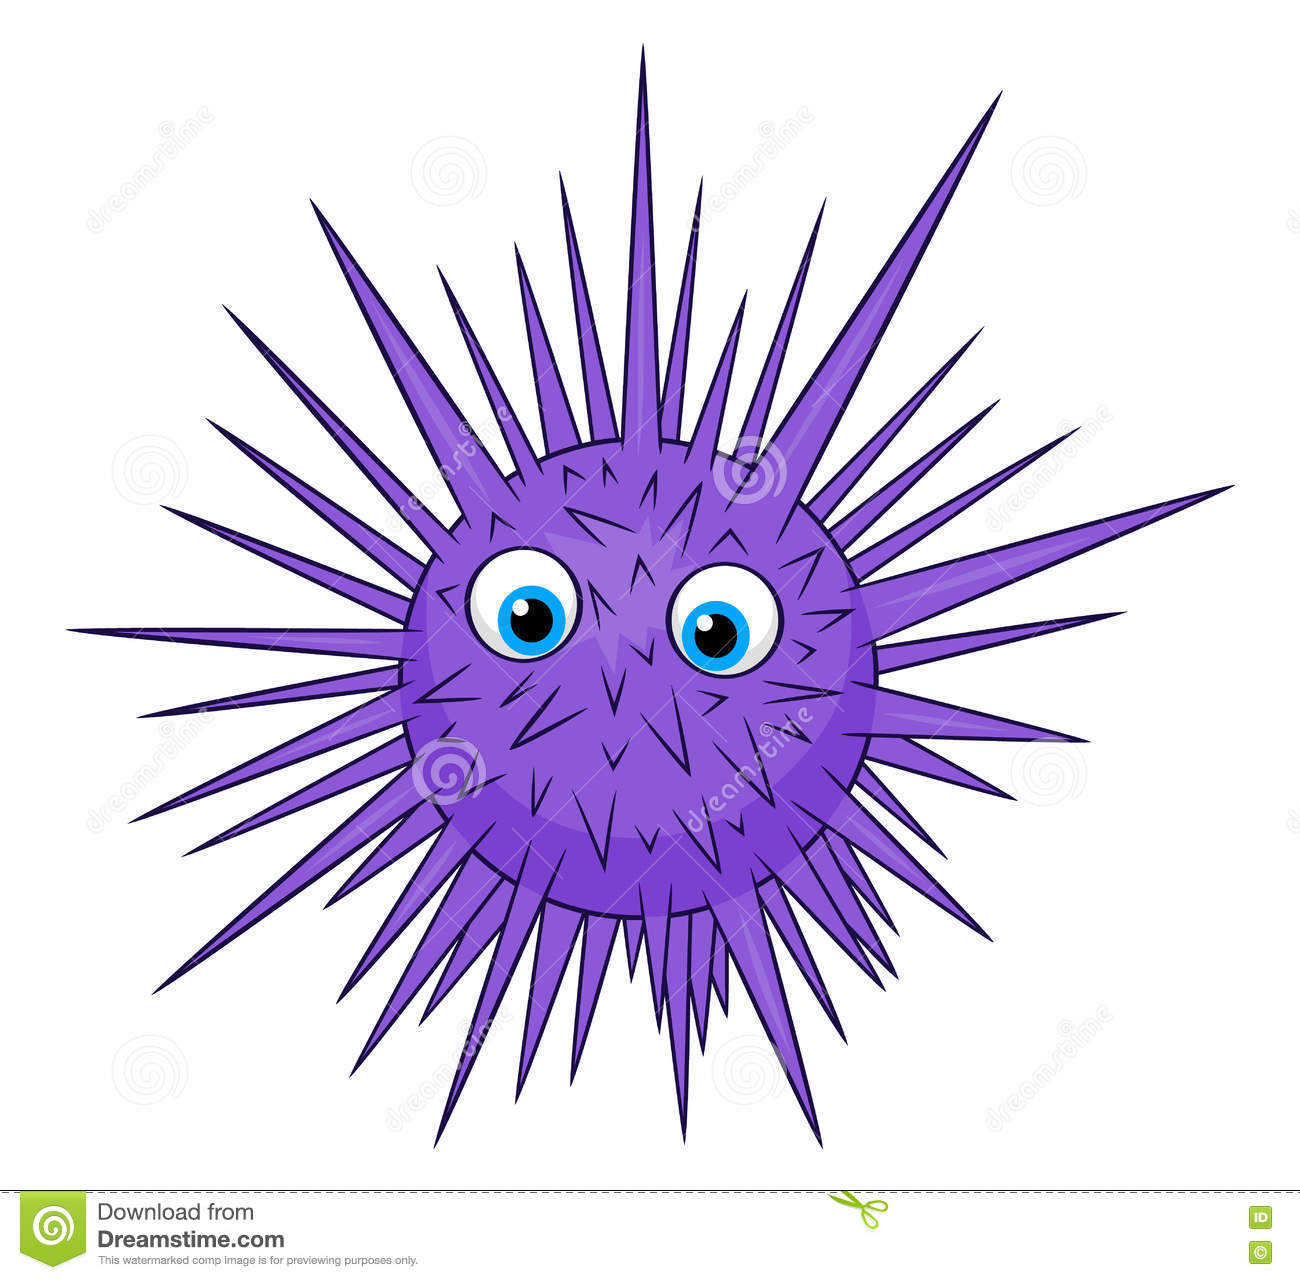 Sea Urchin clipart #1, Download drawings